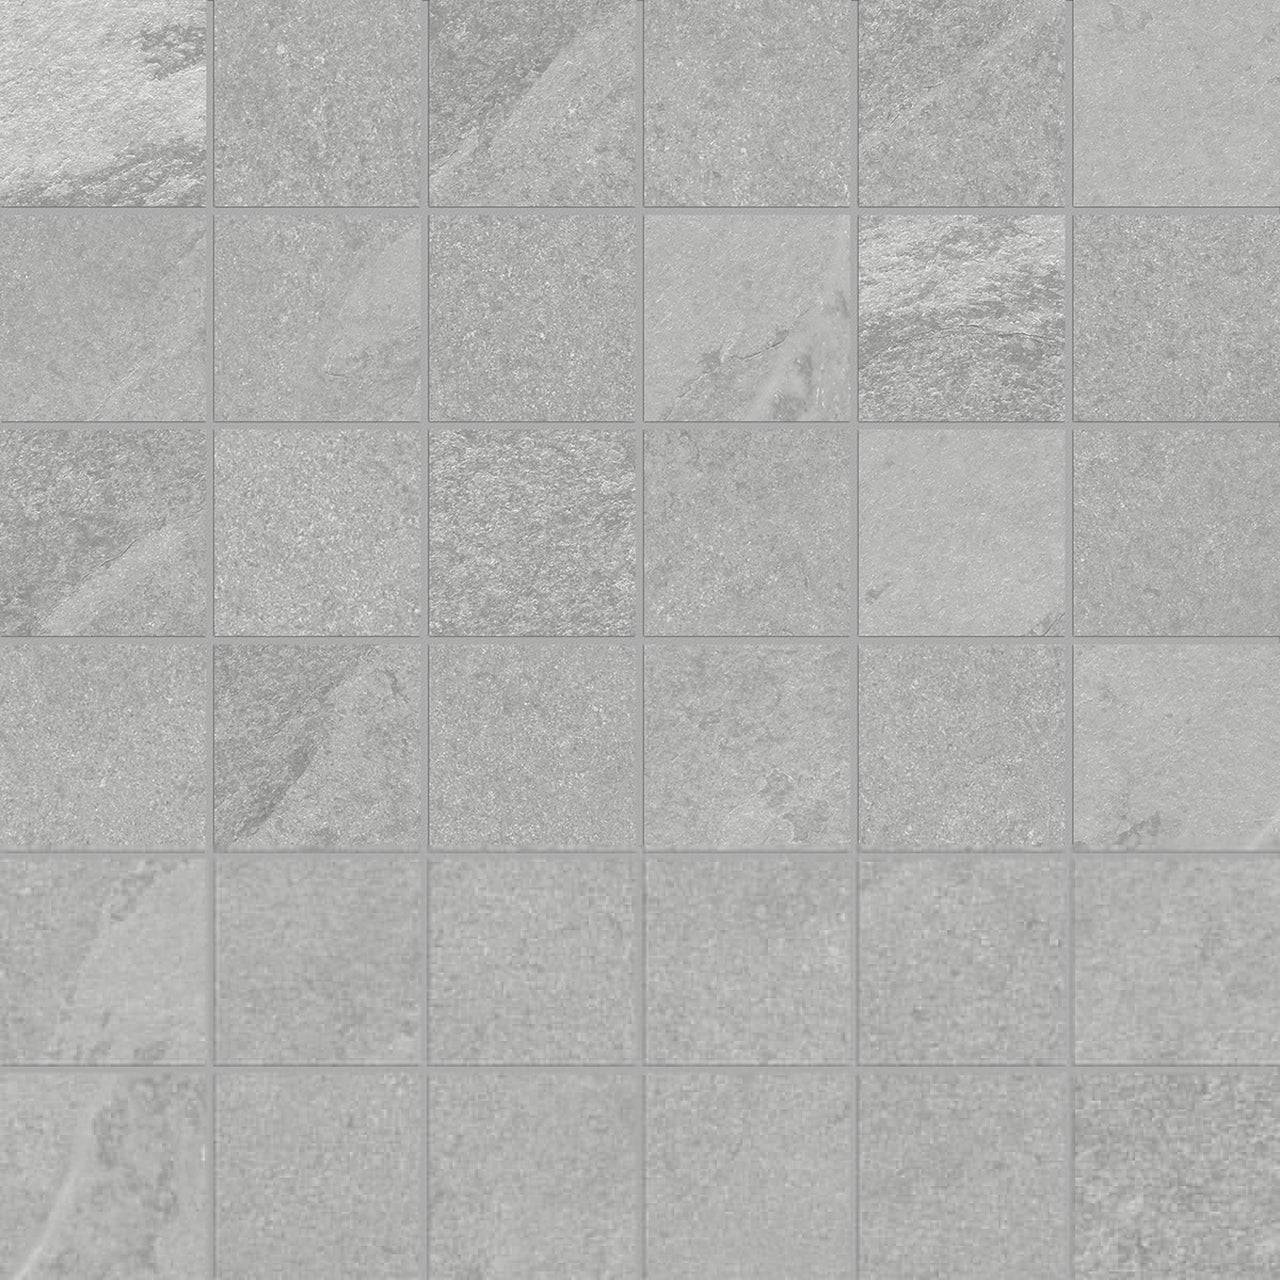 2 X 2 In Nord Lithium Matte Color Body Porcelain Mosaic